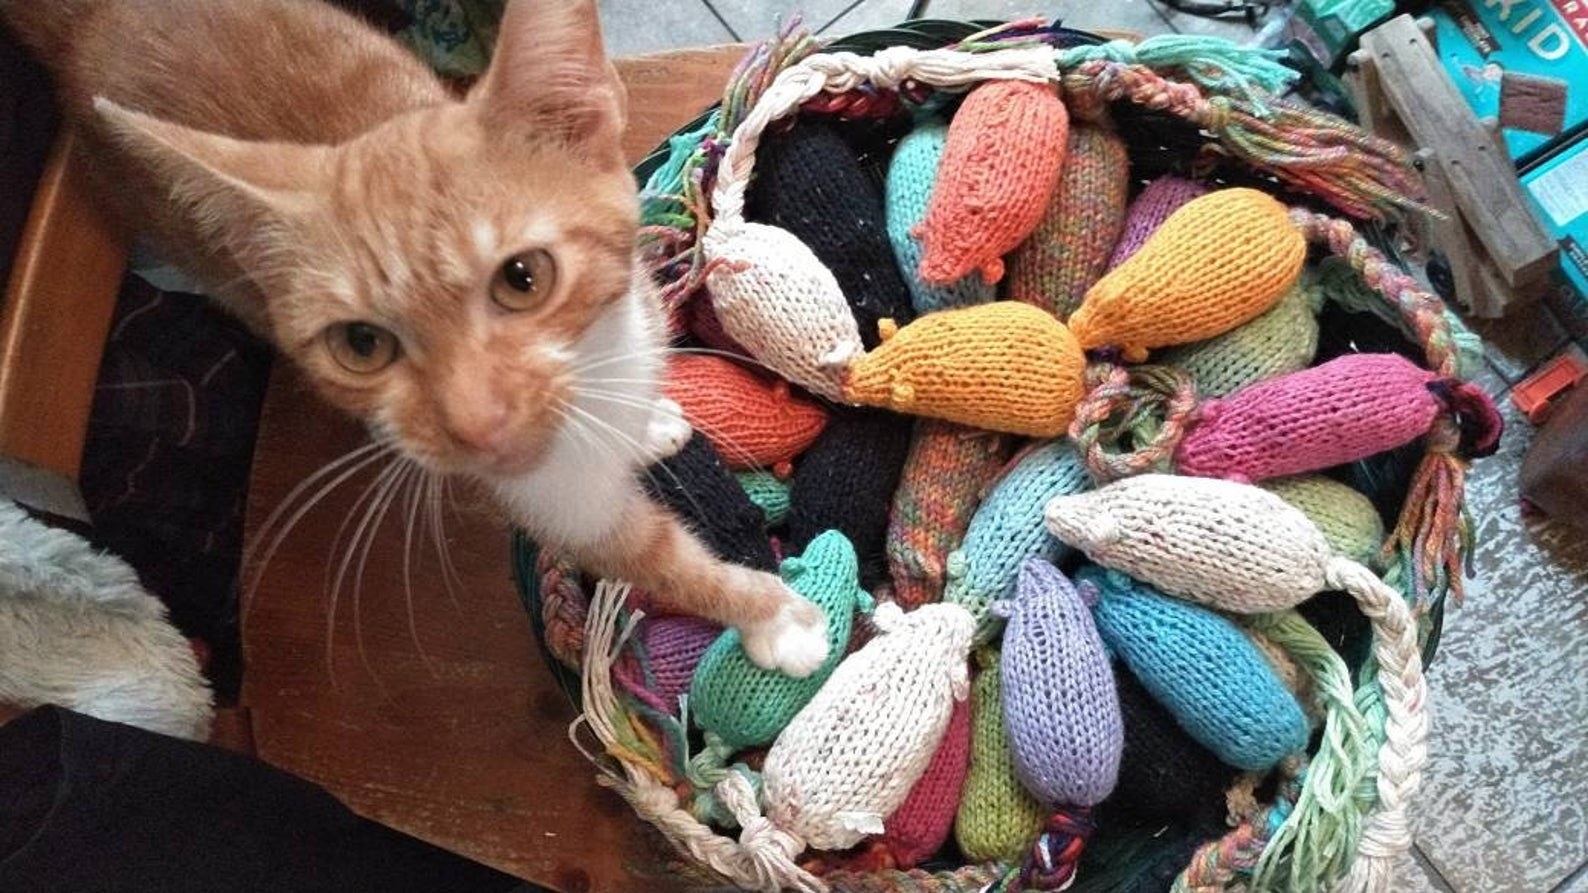 Cat touching pile of mouse-shaped yarn toys